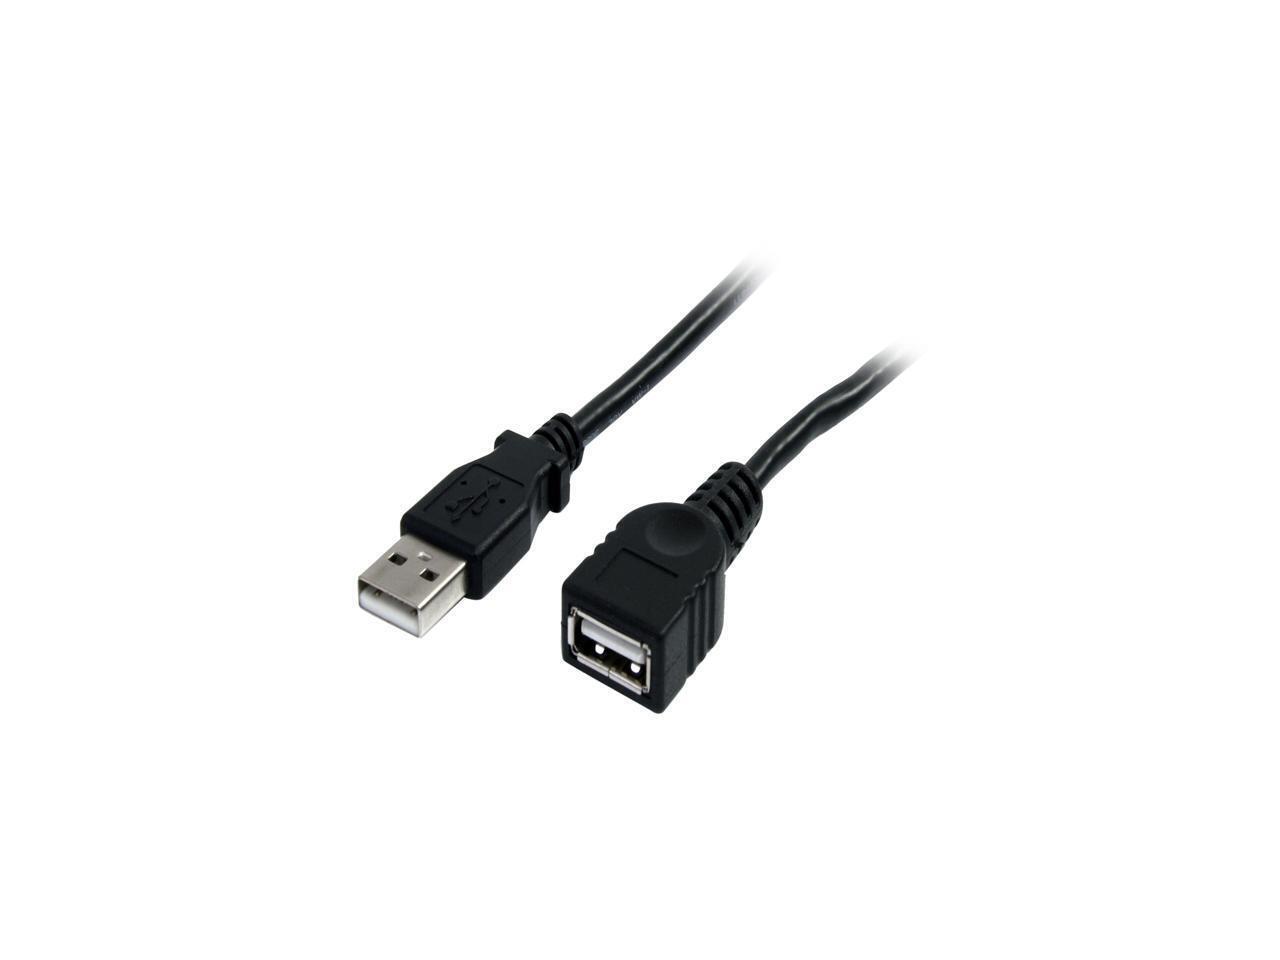 StarTech.com USBEXTAA3BK 3 ft Black USB 2.0 Extension Cable A to A - M/F - 3 ft